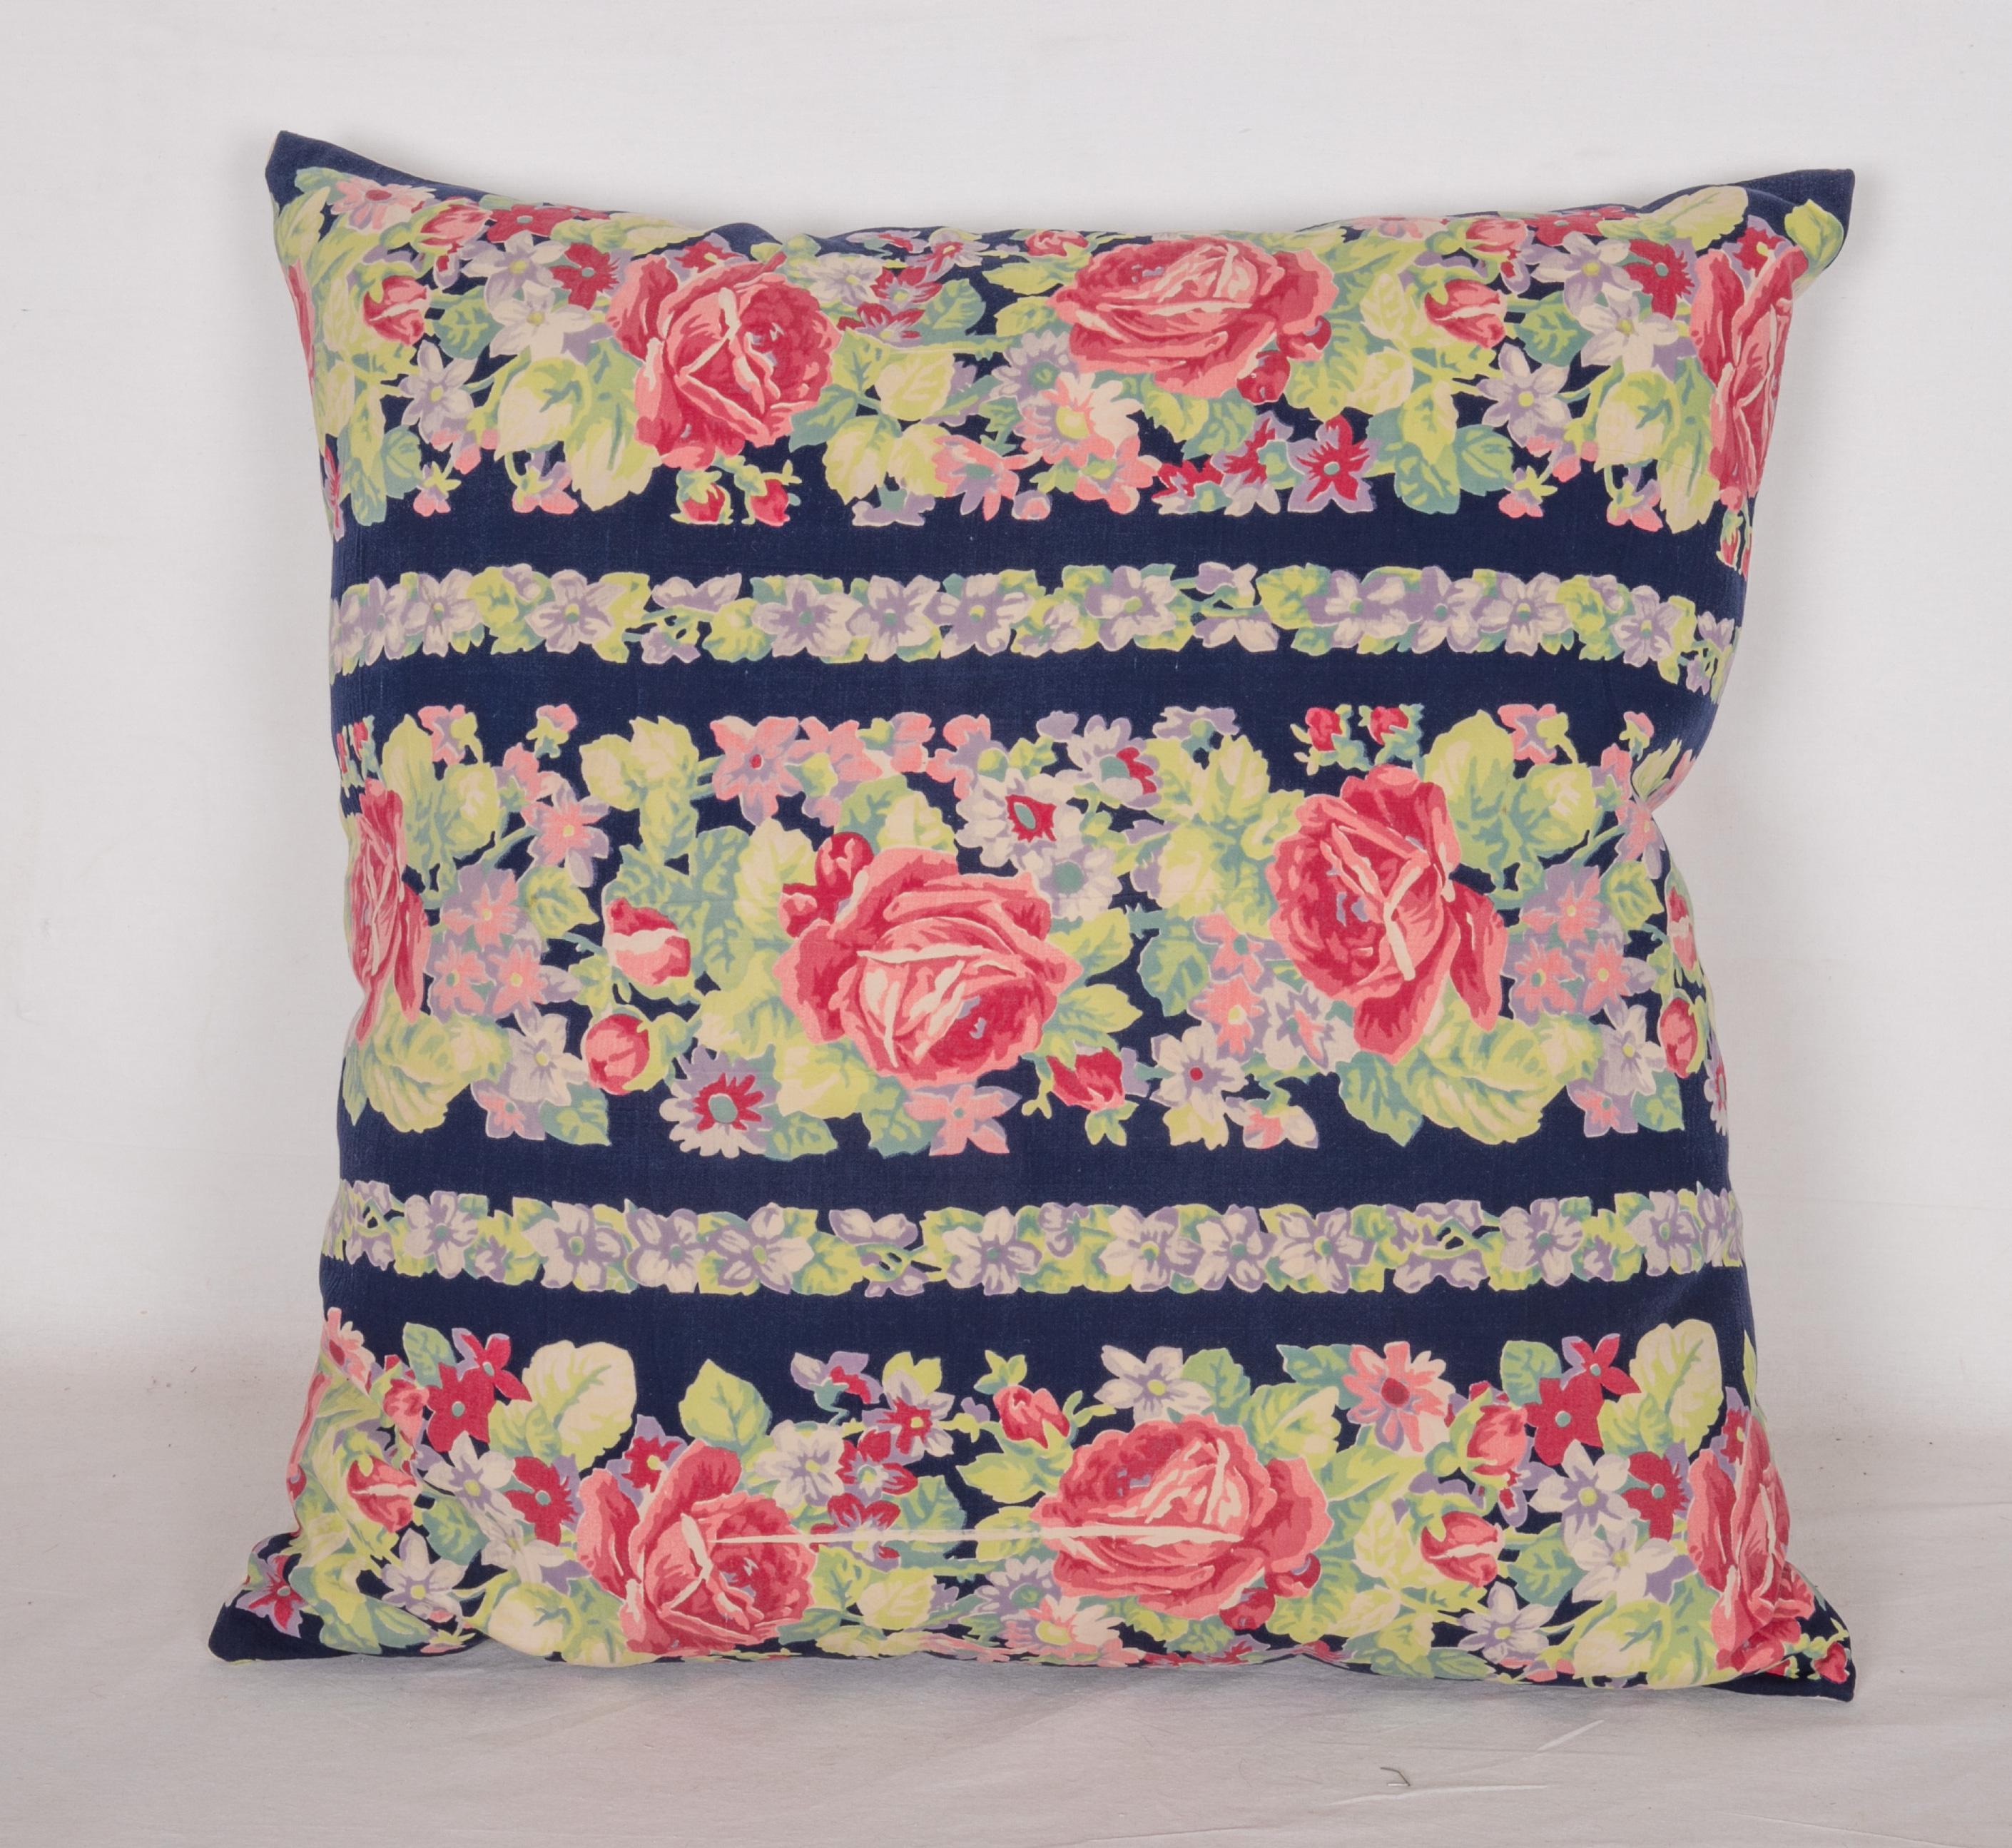 Woven Pillow Cases Made from Mid-20th Century Russian Cotton Printed Textile, 1960s For Sale